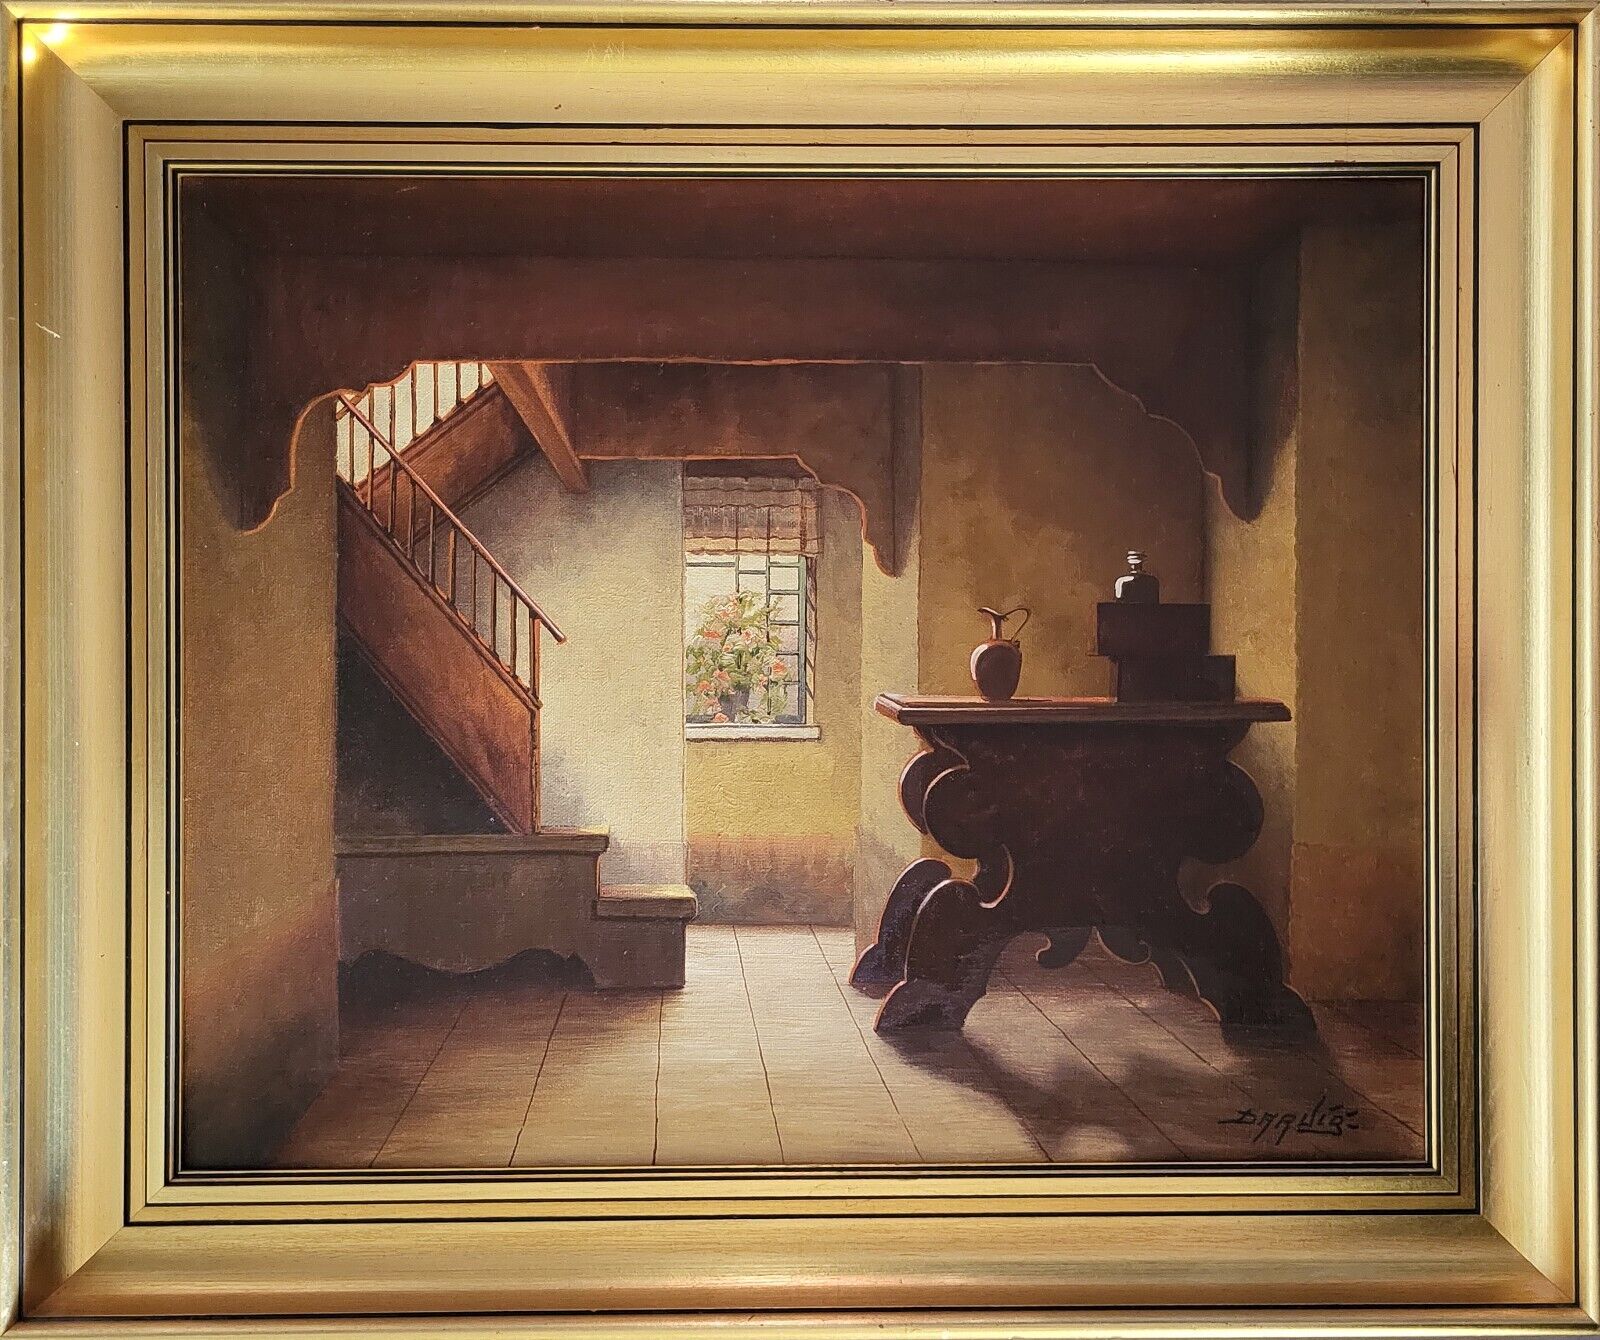 Oil painting Kaj Peter Darvig(1912-?): “Interior with a staircase”